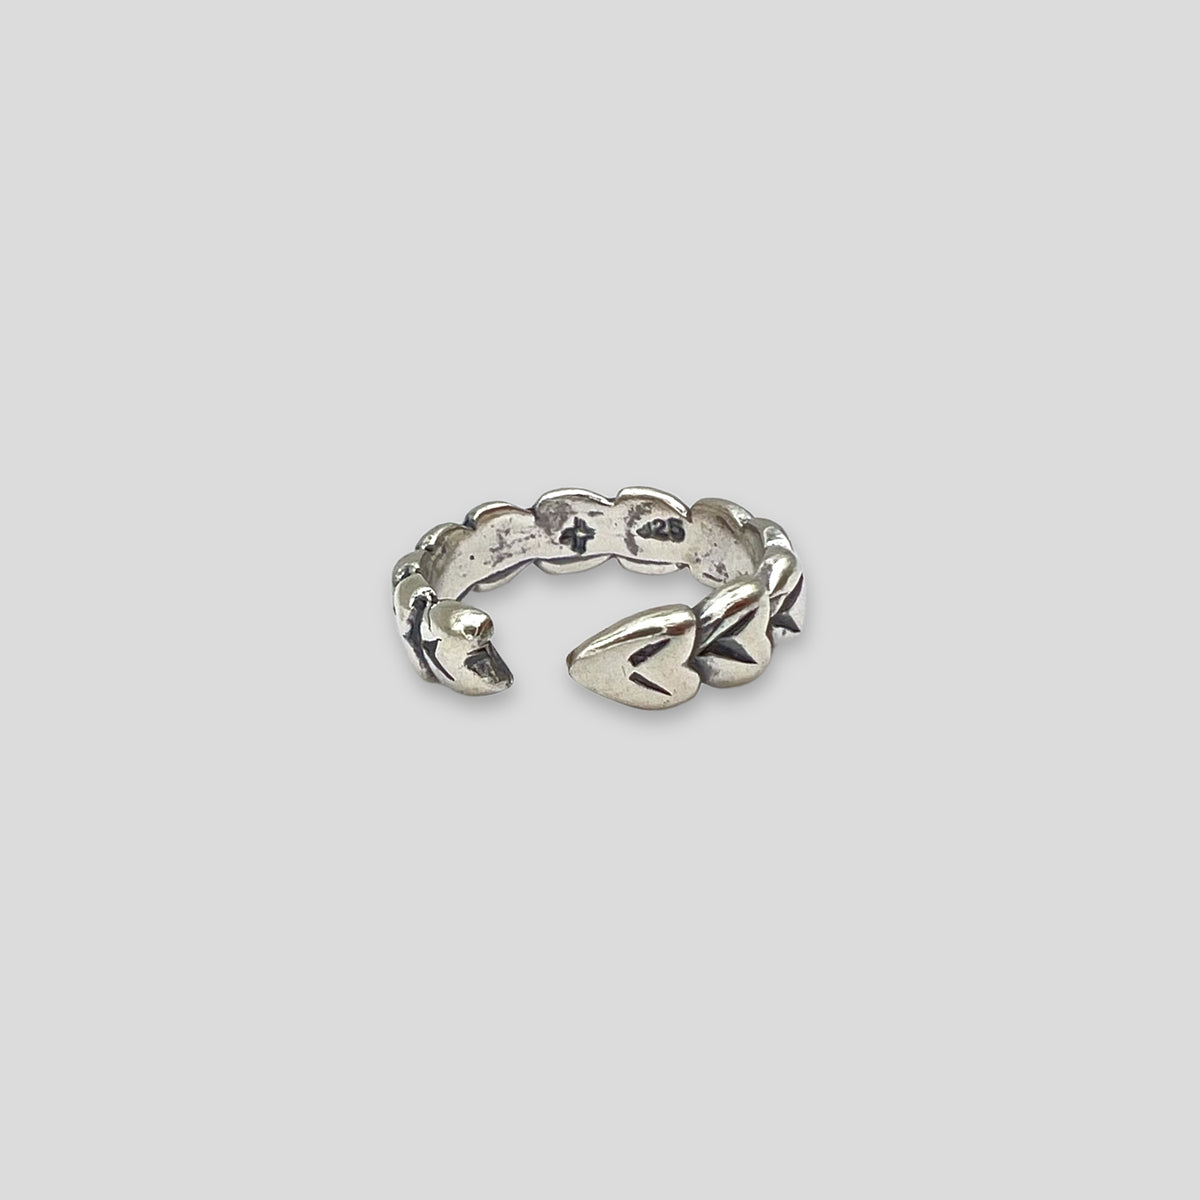 Overlapped Hearts Sterling Silver Toe Rings